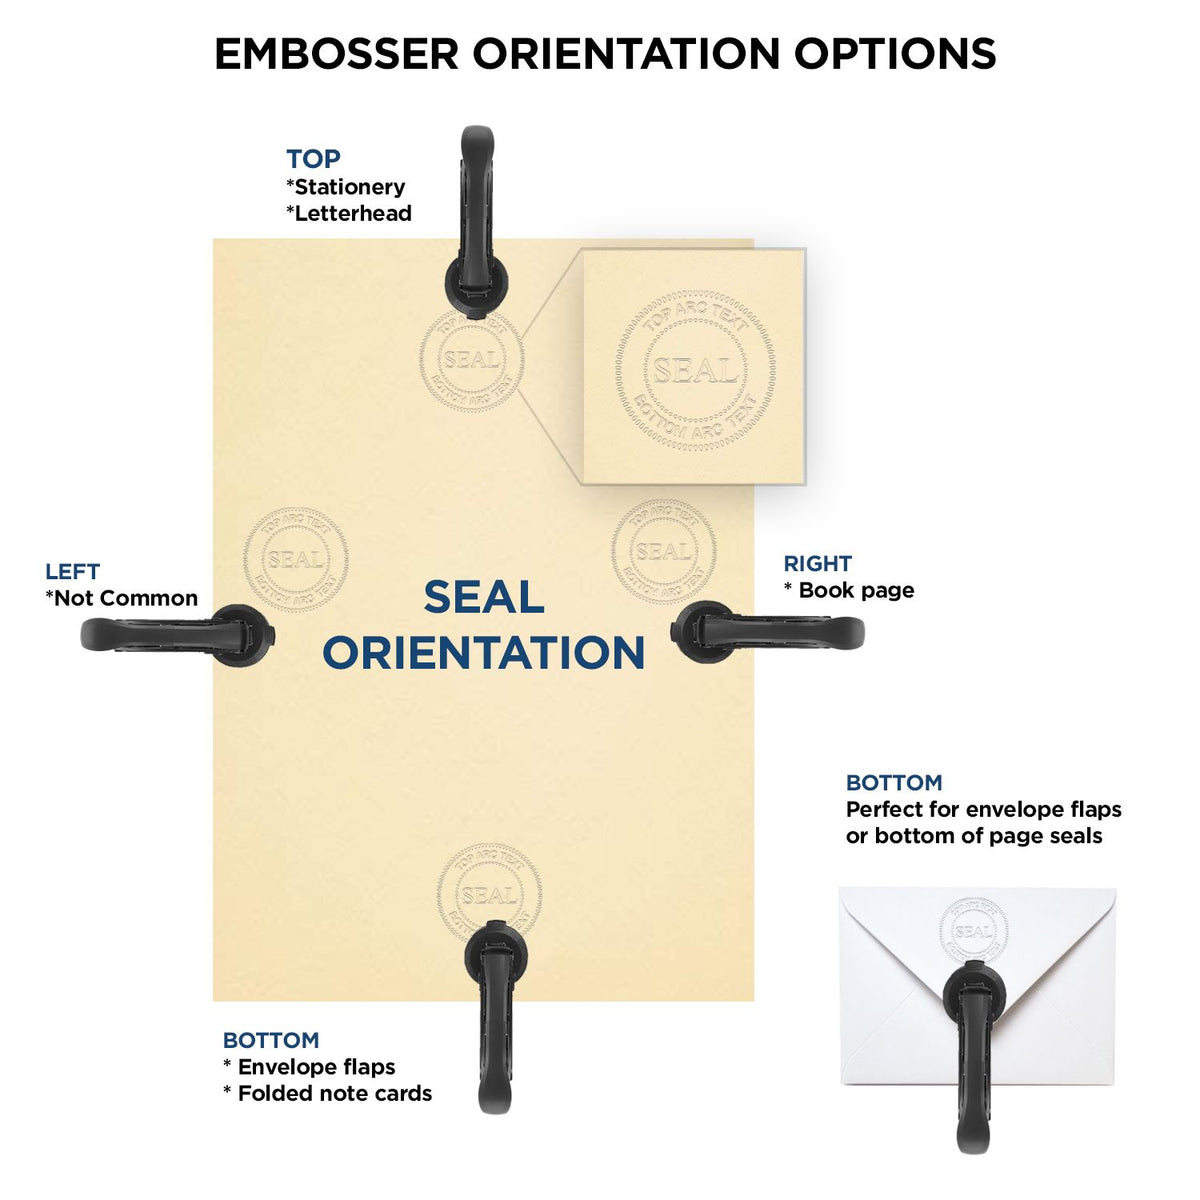 An infographic for the State of Delaware Extended Long Reach Geologist Seal showing embosser orientation, this is showing examples of a top, bottom, right and left insert.